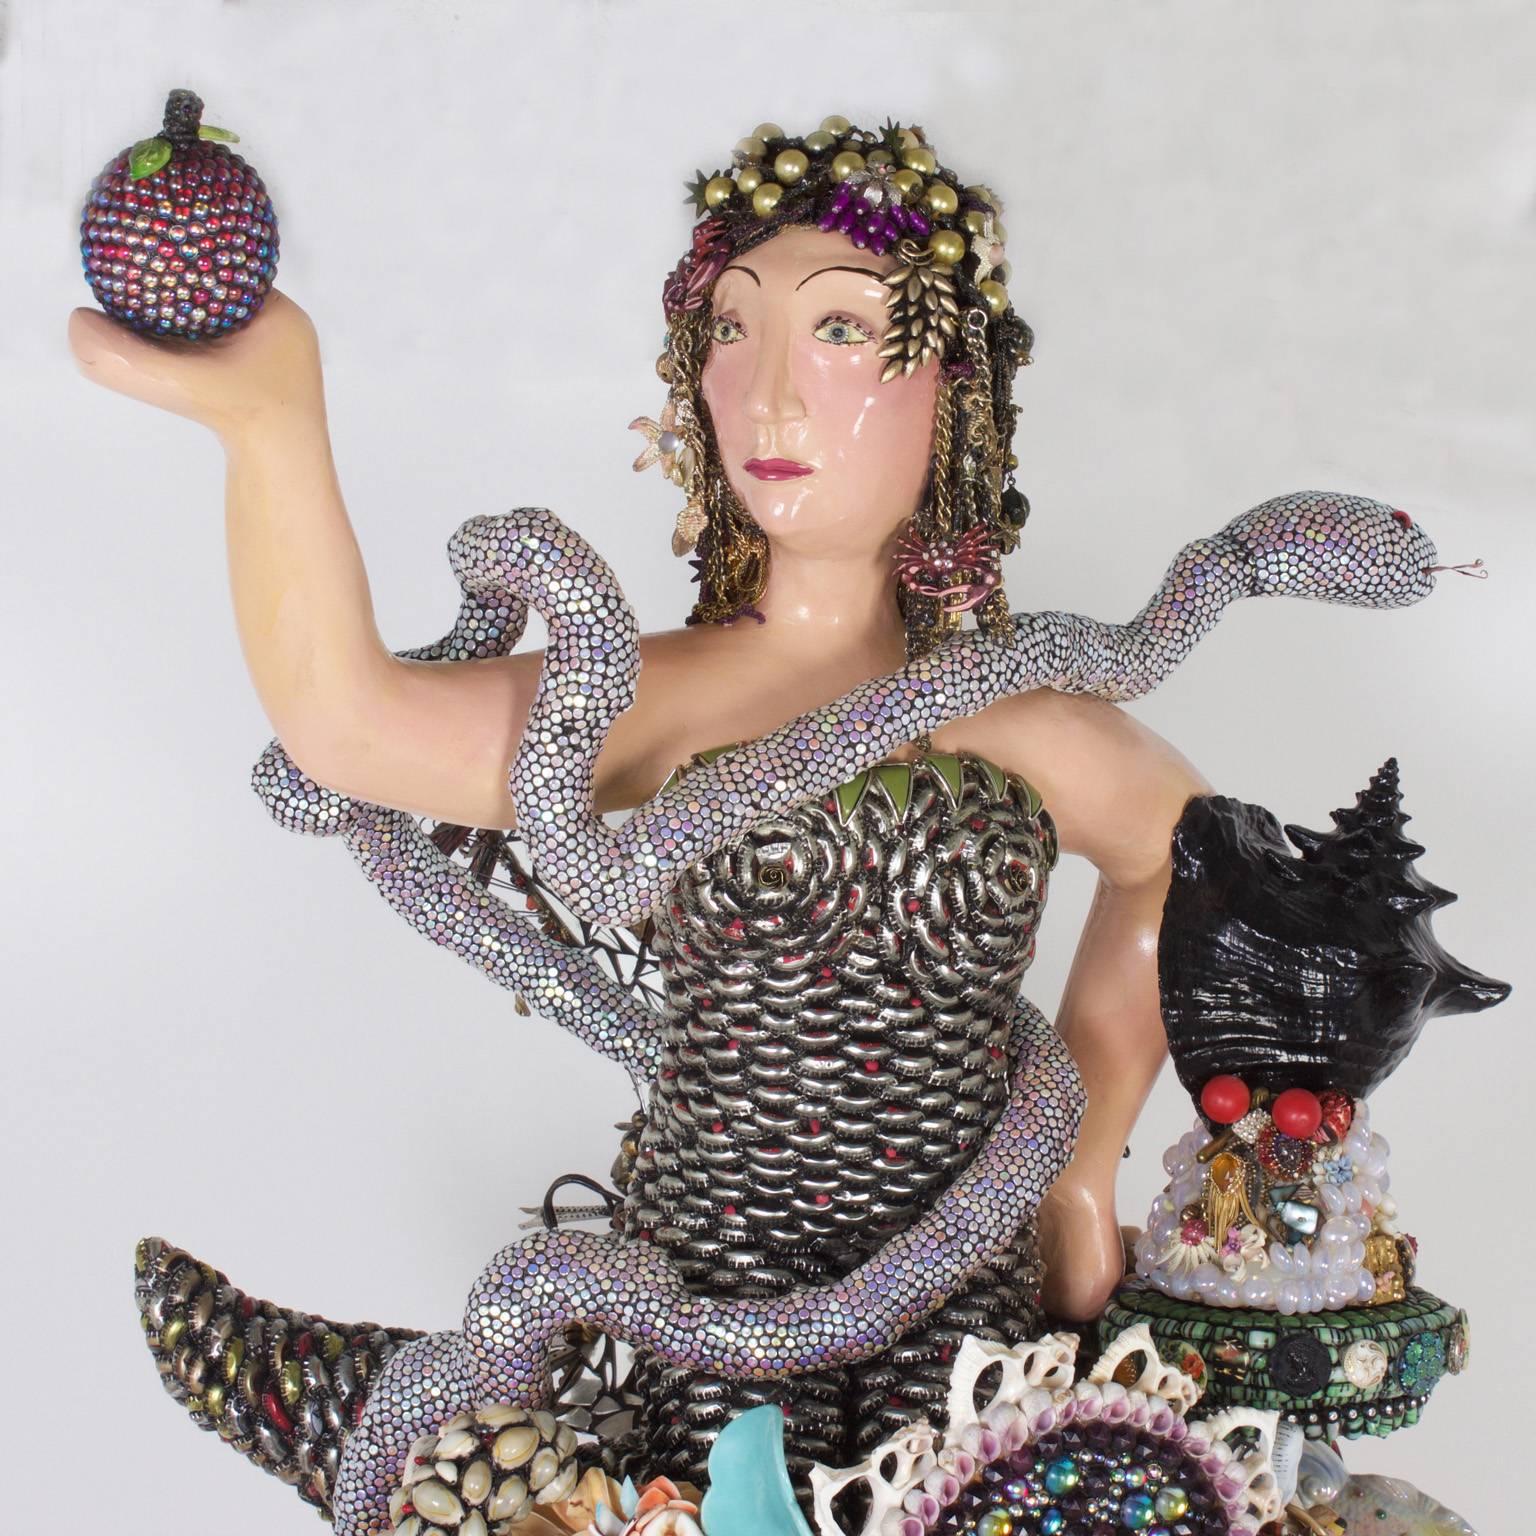 Outrageous larger than life piece of Folk Art painstakingly composed of found objects such as sea shells, beads, toys, vintage jewelry buttons, and bottle caps (to name a few). There is an obvious reference to Eve and snake, that the artist seems to